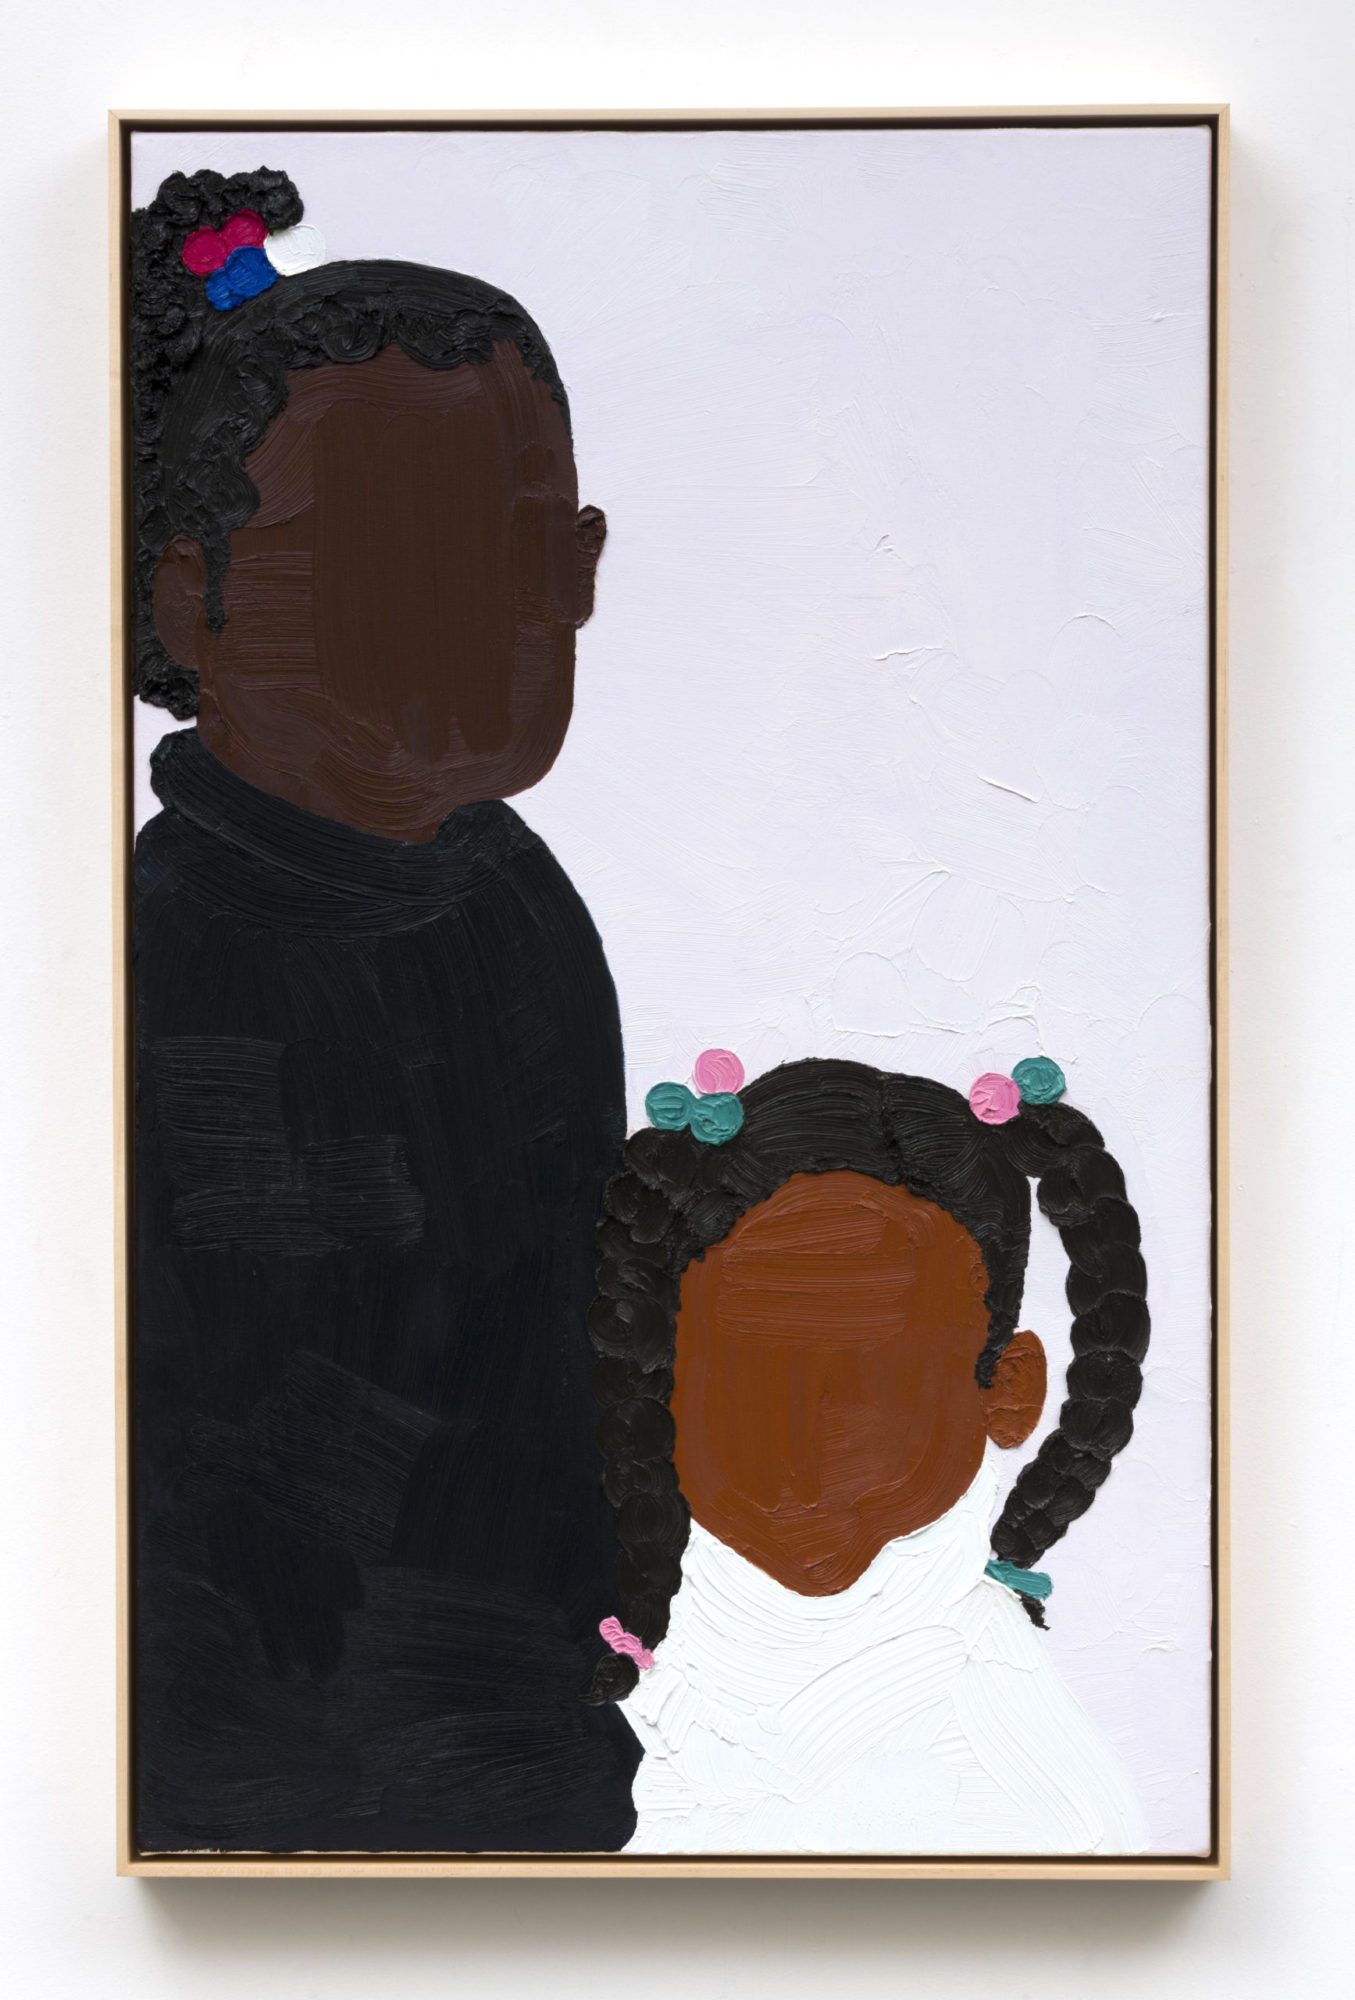 Two black figures are without facial features and are set against an off-white background